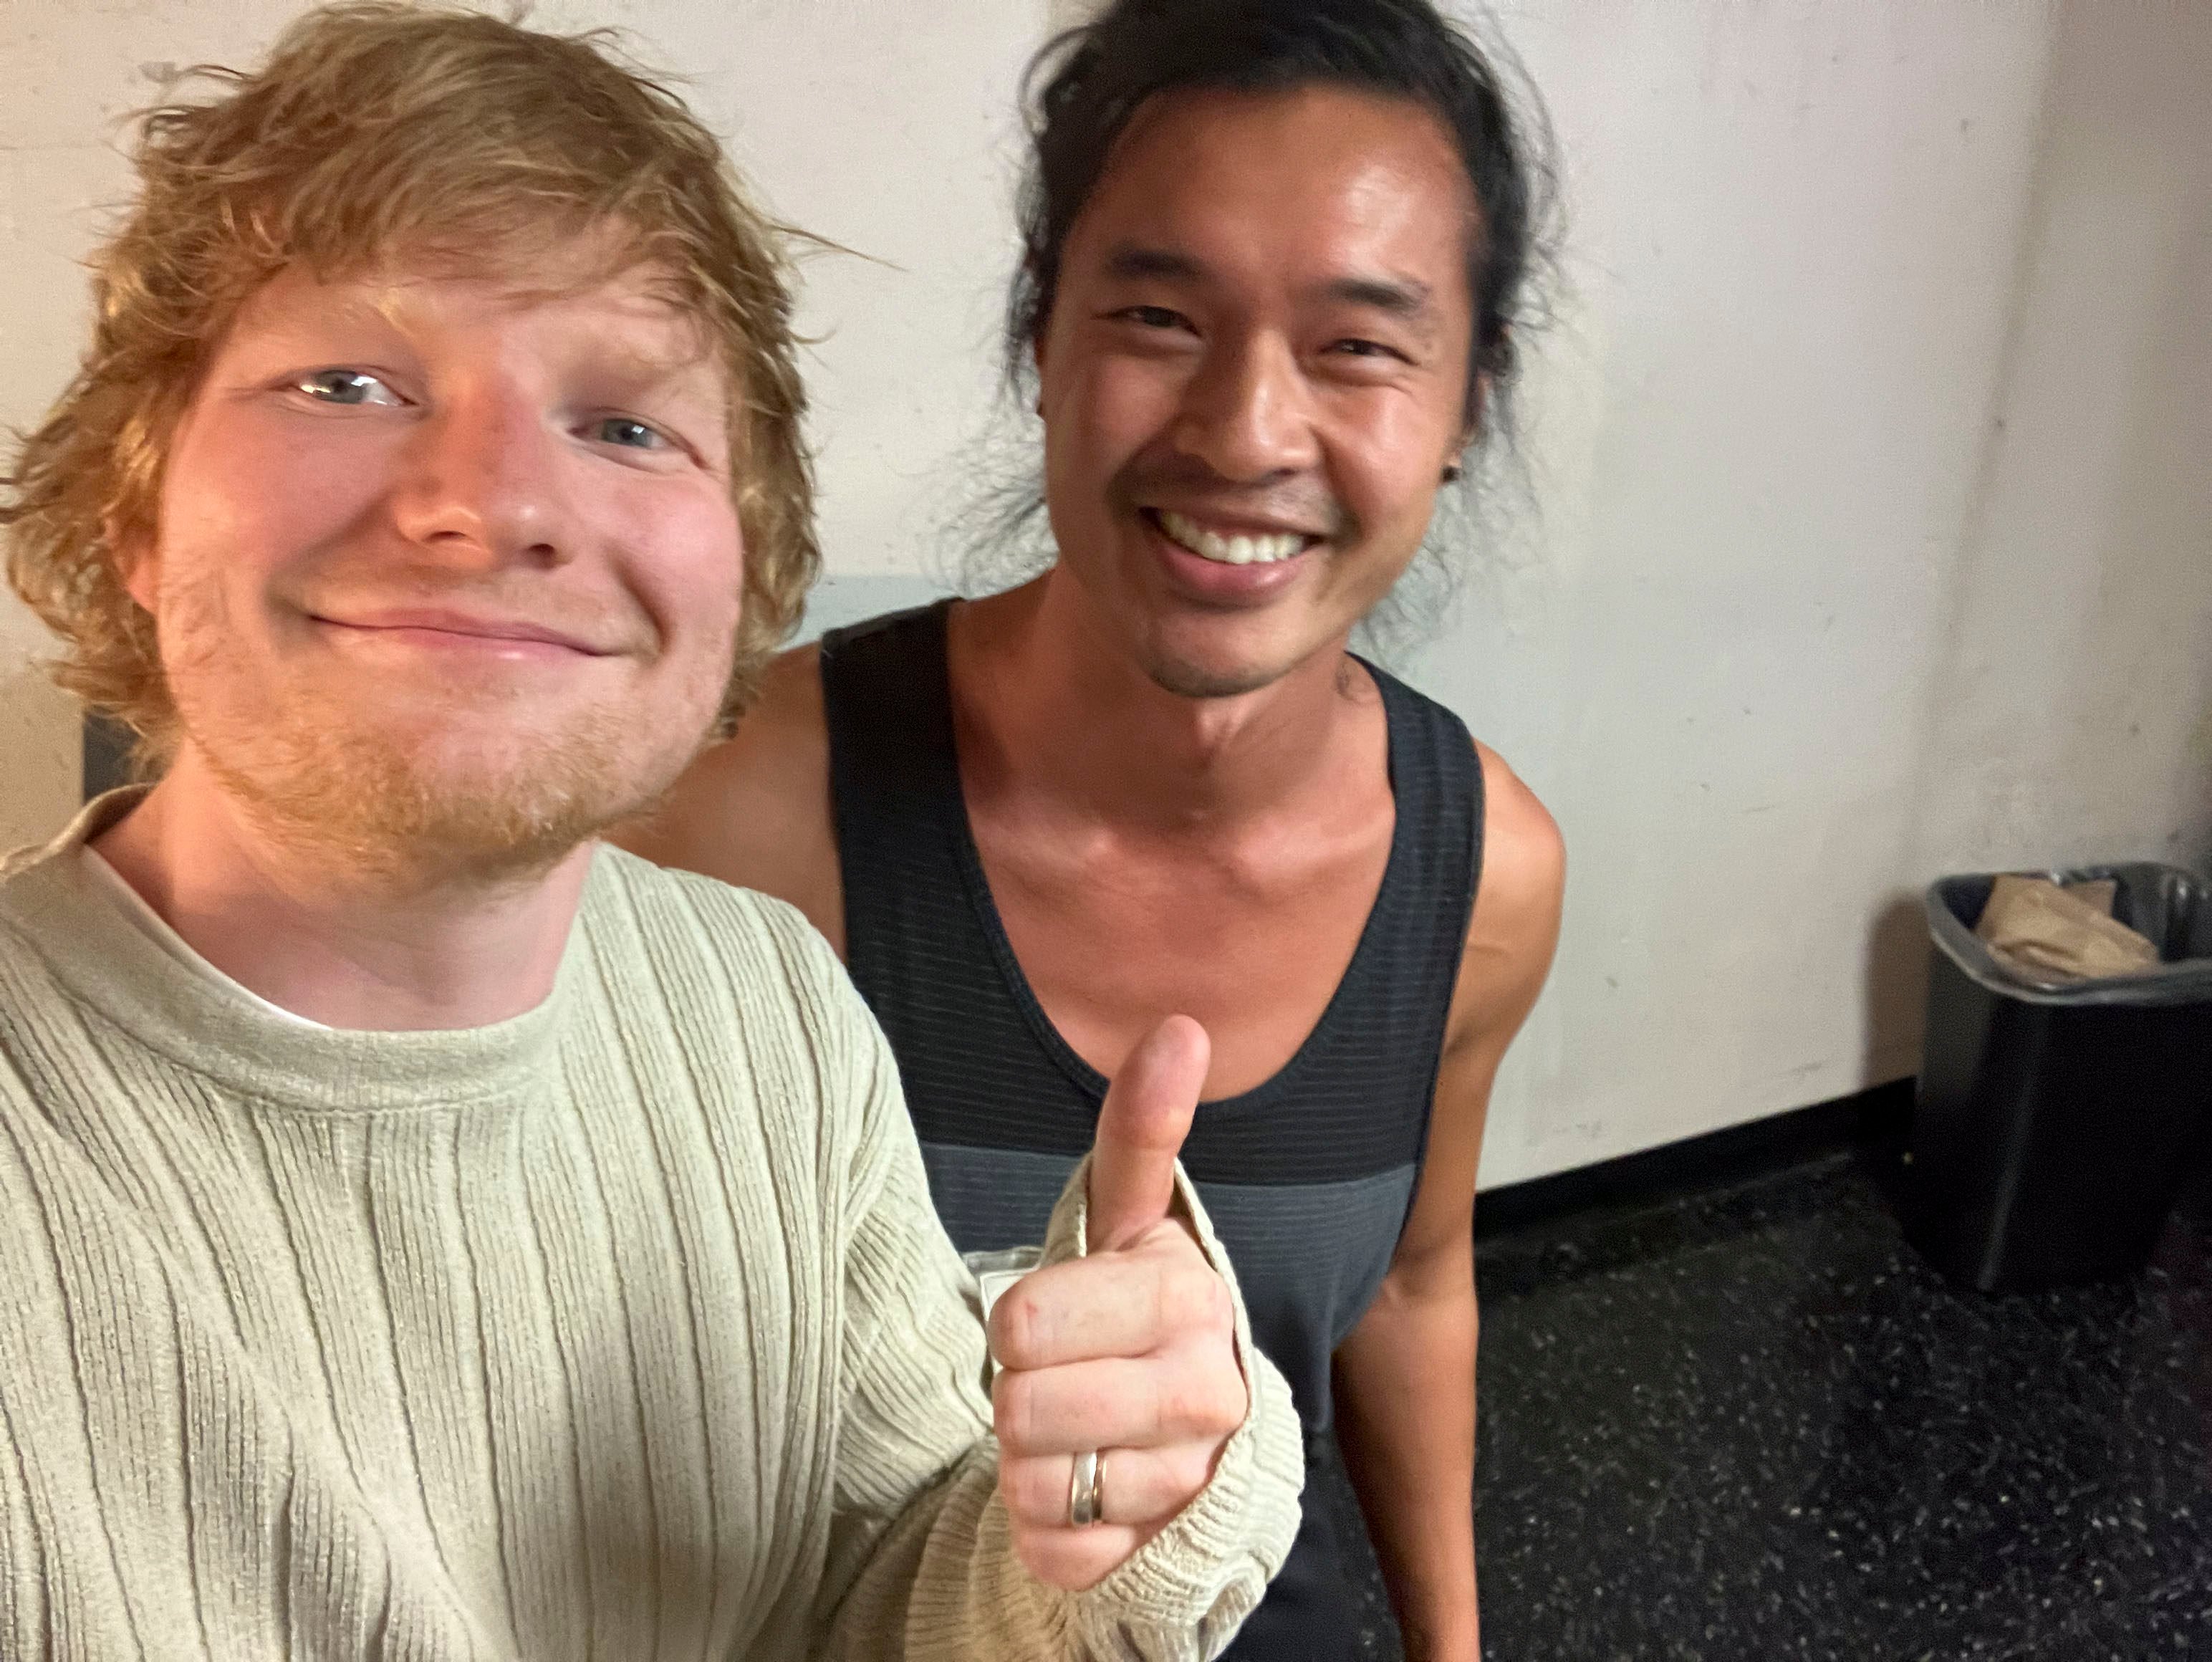 Busker Daniel Lew, who was invited to meet Ed Sheeran (left) after being heard busking in Vancouver, Canada, recently released his latest album, Destiny, on June 25. Photo: Daniel Lew